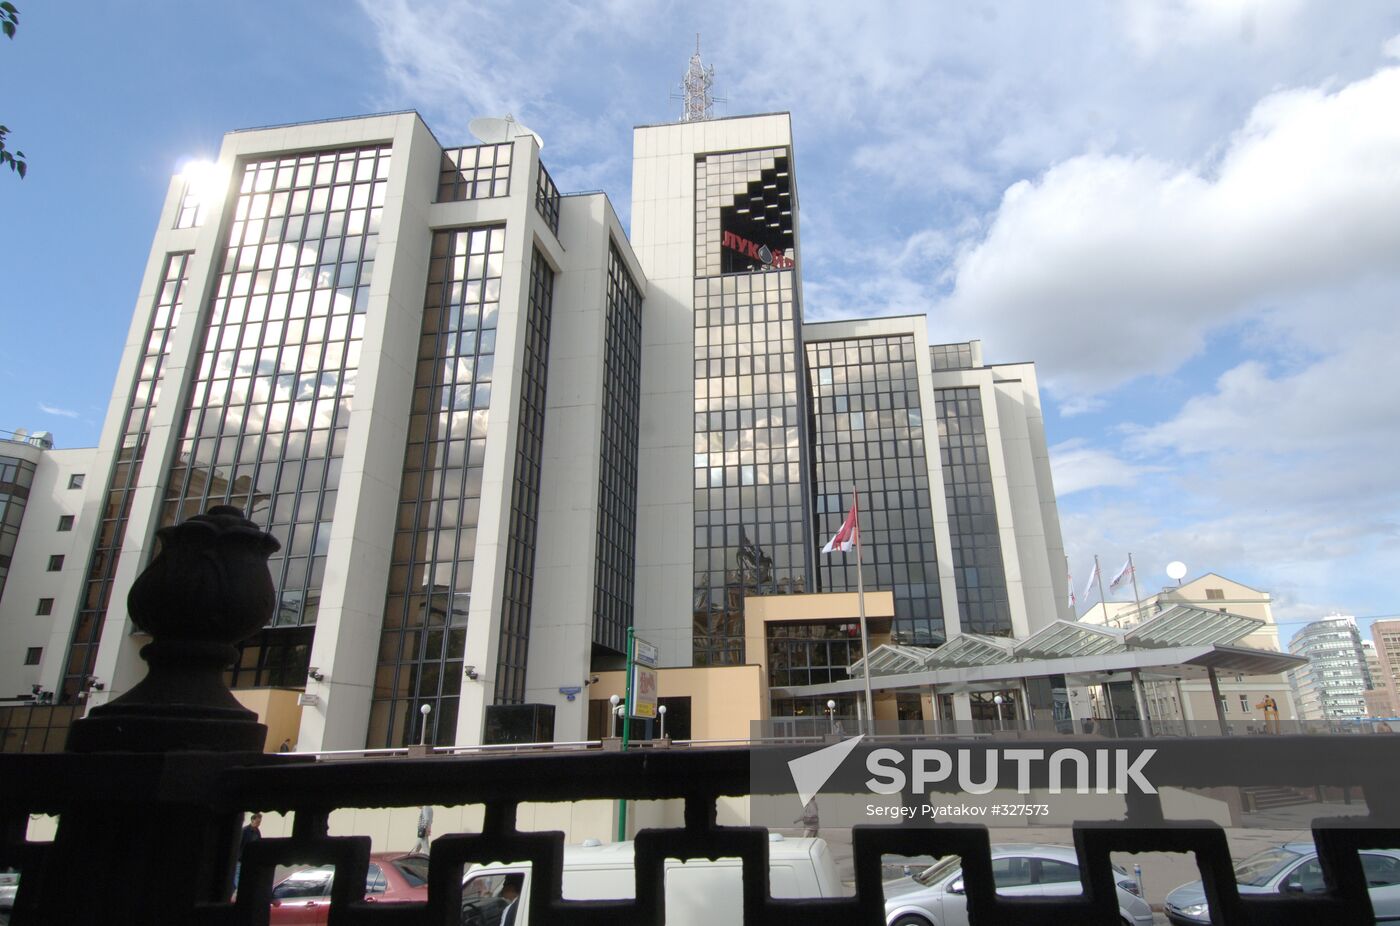 LUKoil headquarters in Moscow